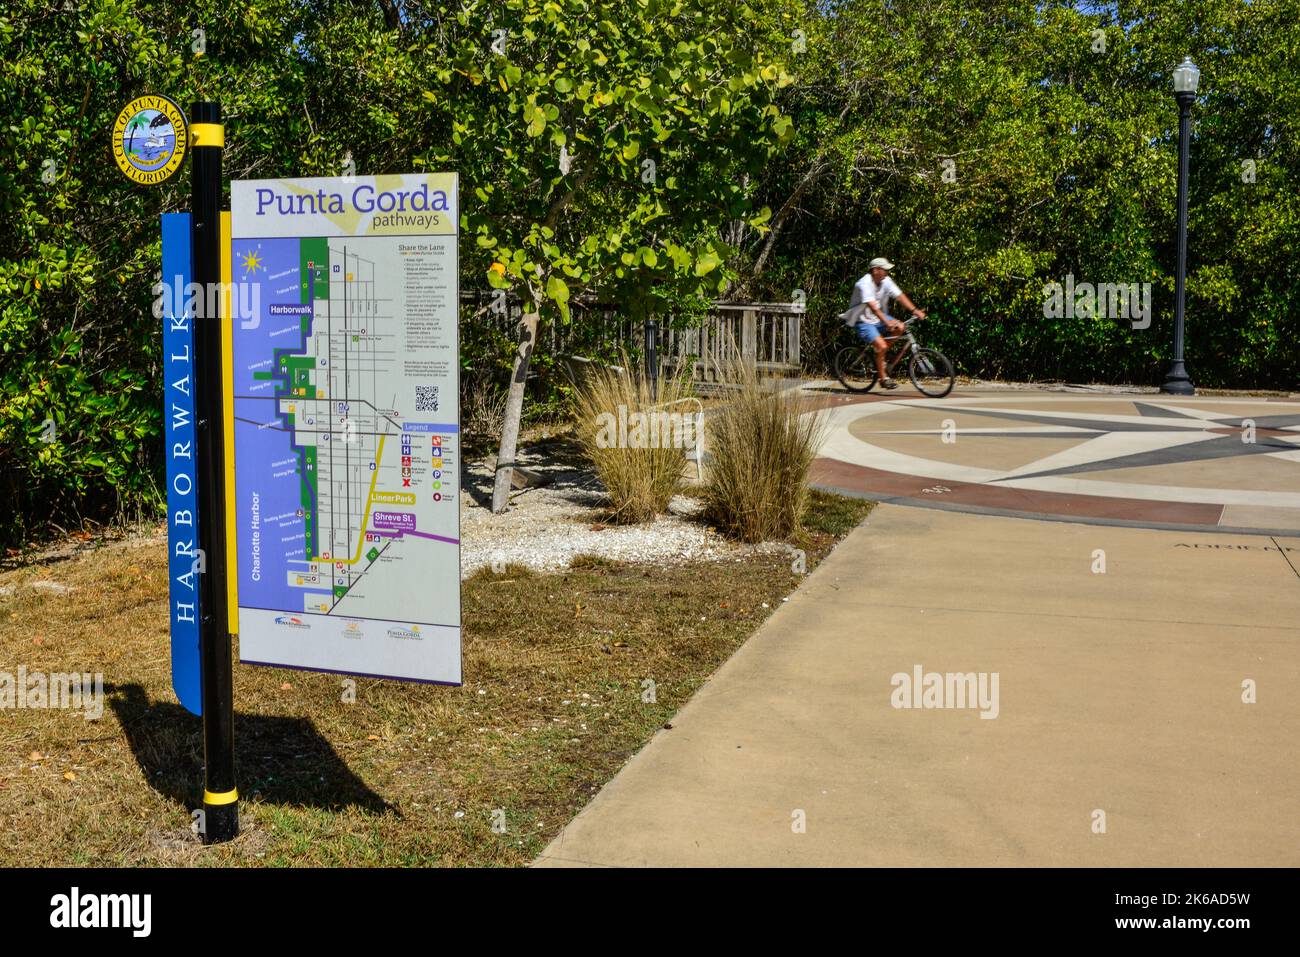 Harborwalk sign for City of Punta Gorda with map with Bicyclist enjoying the  paths in Trabue Park on the Harborwalk in Punta Gorda, Florida Stock Photo